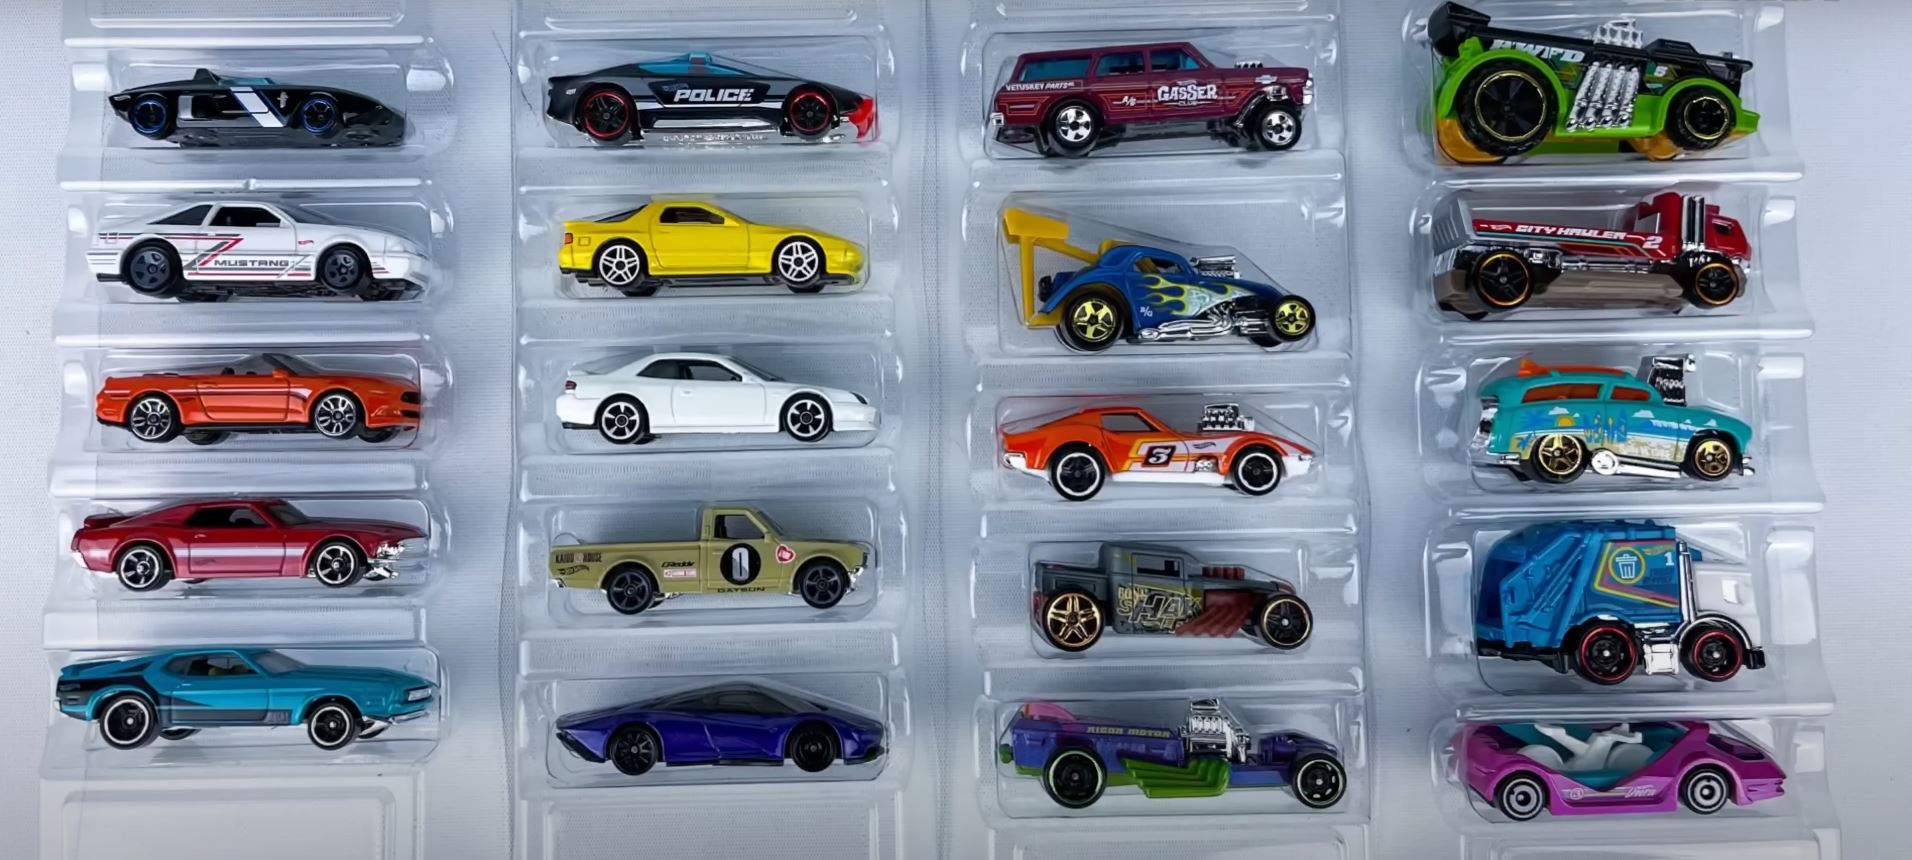 Hot Wheels Chevy 5-Pack Diecast Car for sale online 